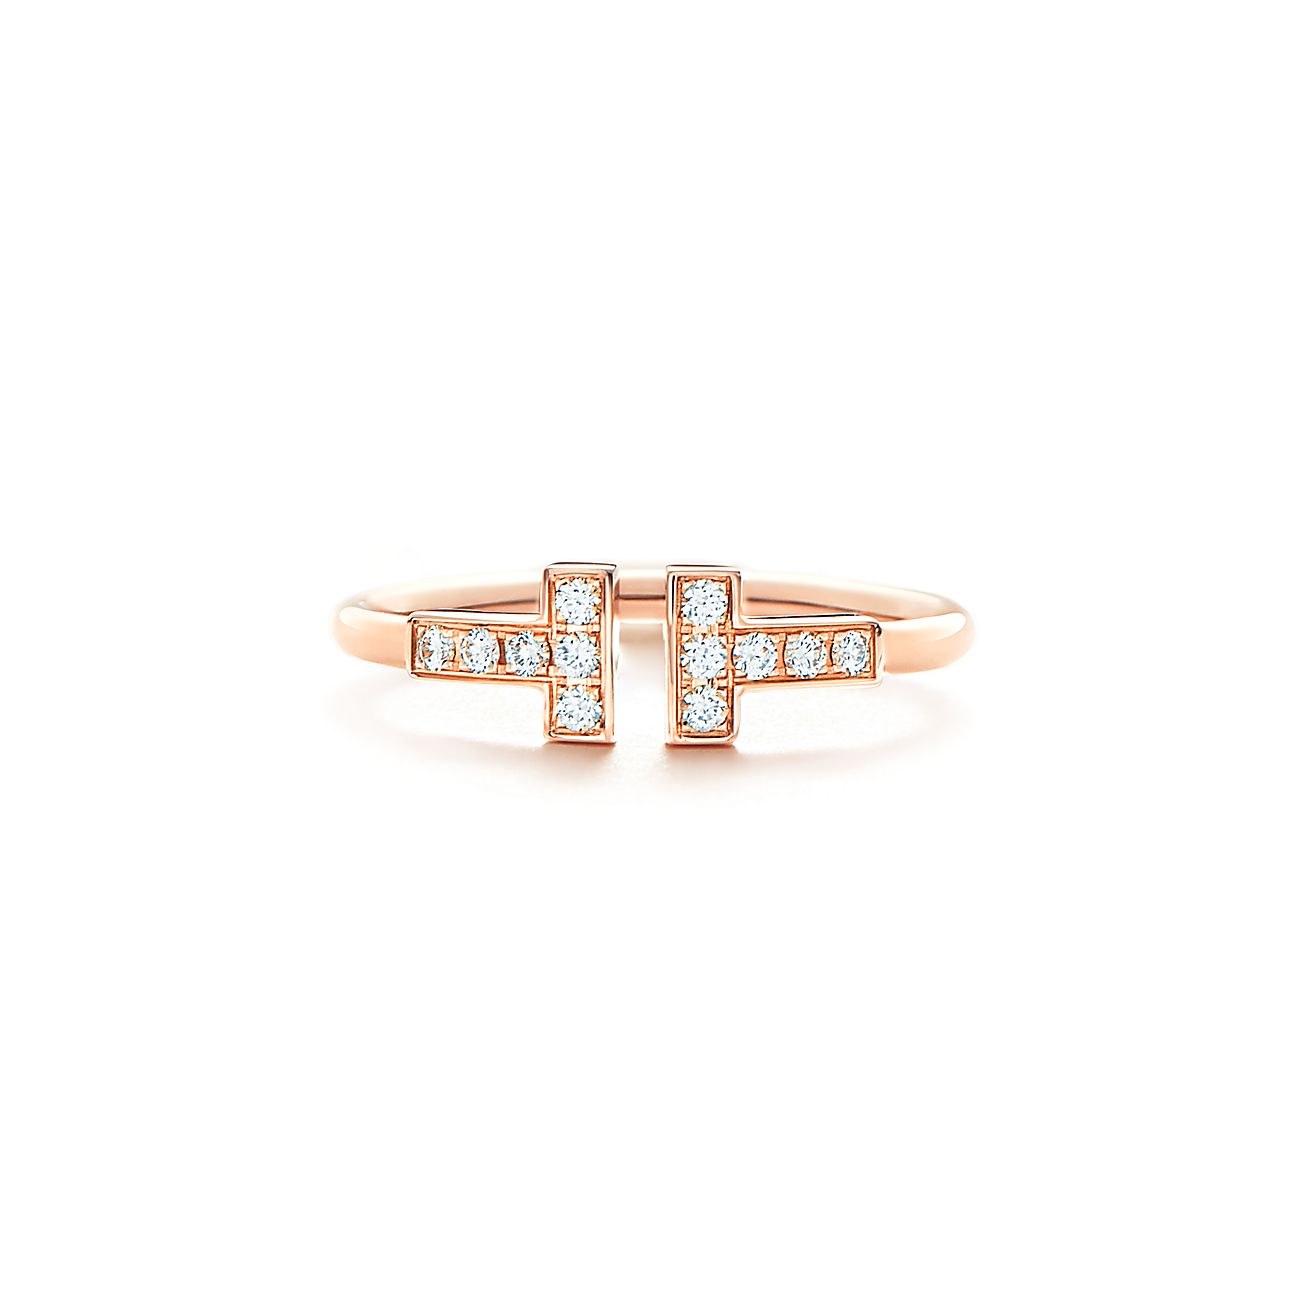 Tiffany T wire ring in 18k rose gold with diamonds. Tiffany & Co.